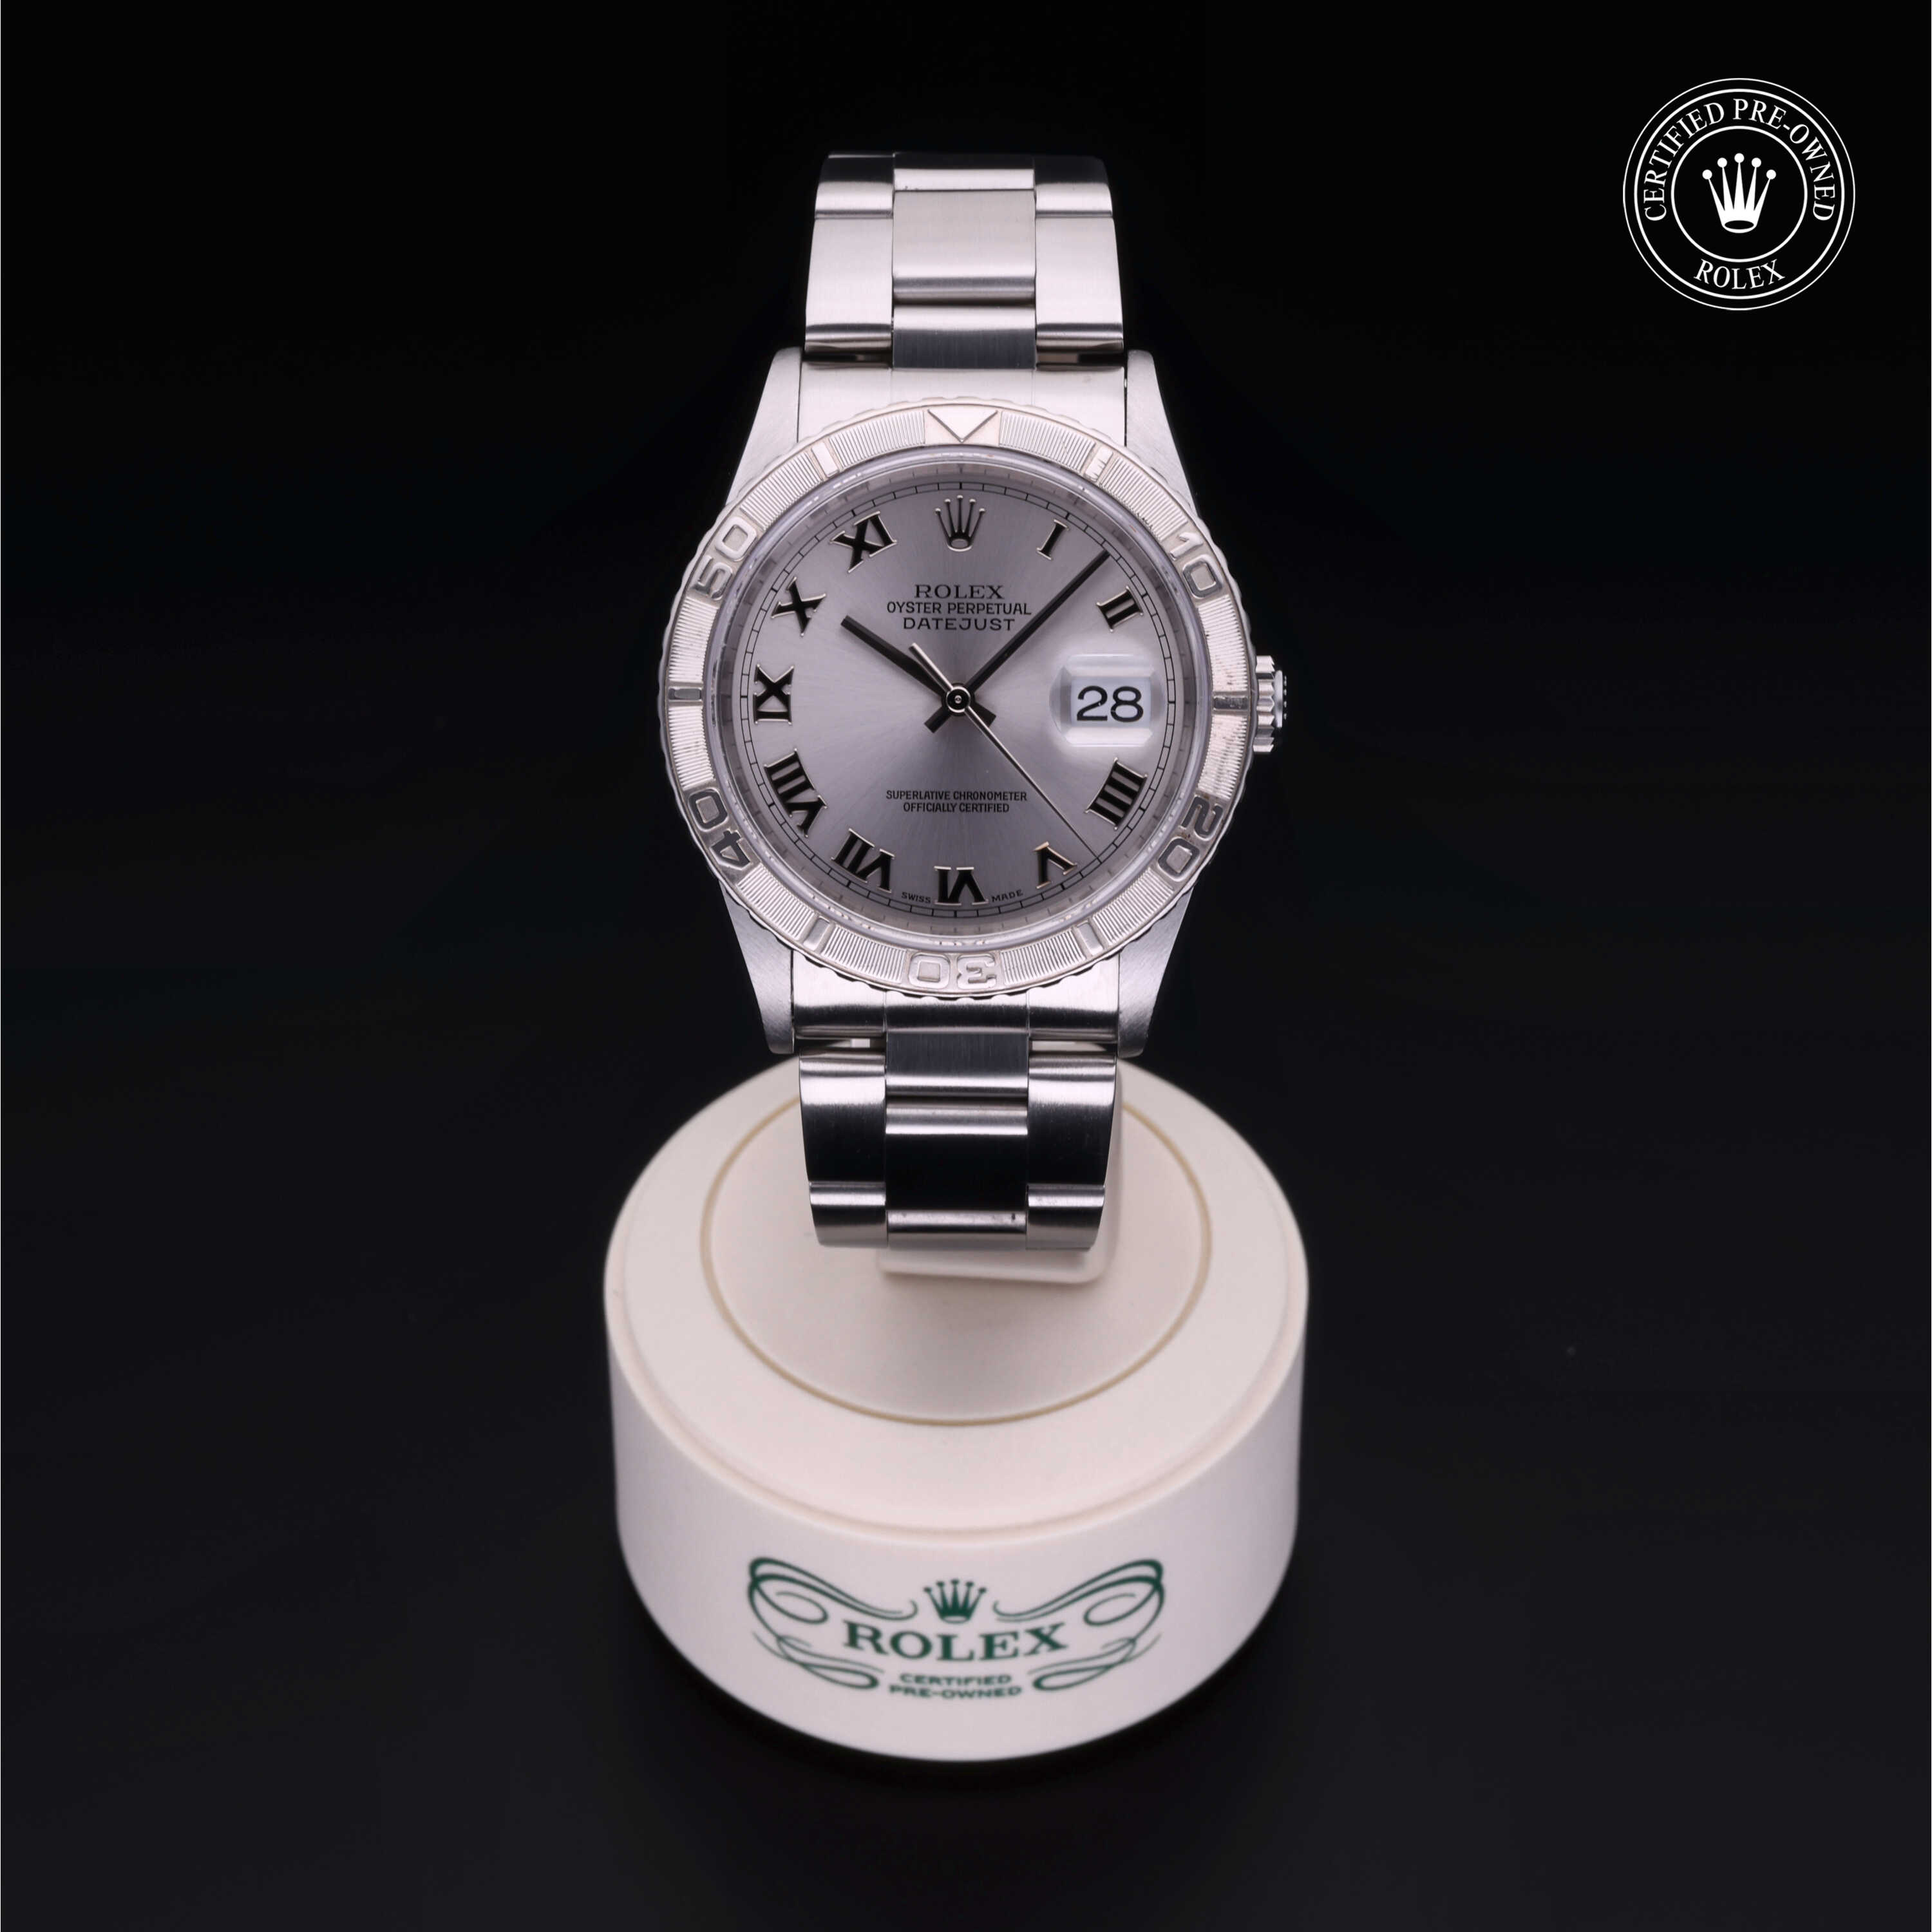 Rolex Turn-O-Graph in Oystersteel and white gold M16264-0034 at Wilson & Son Jewelers